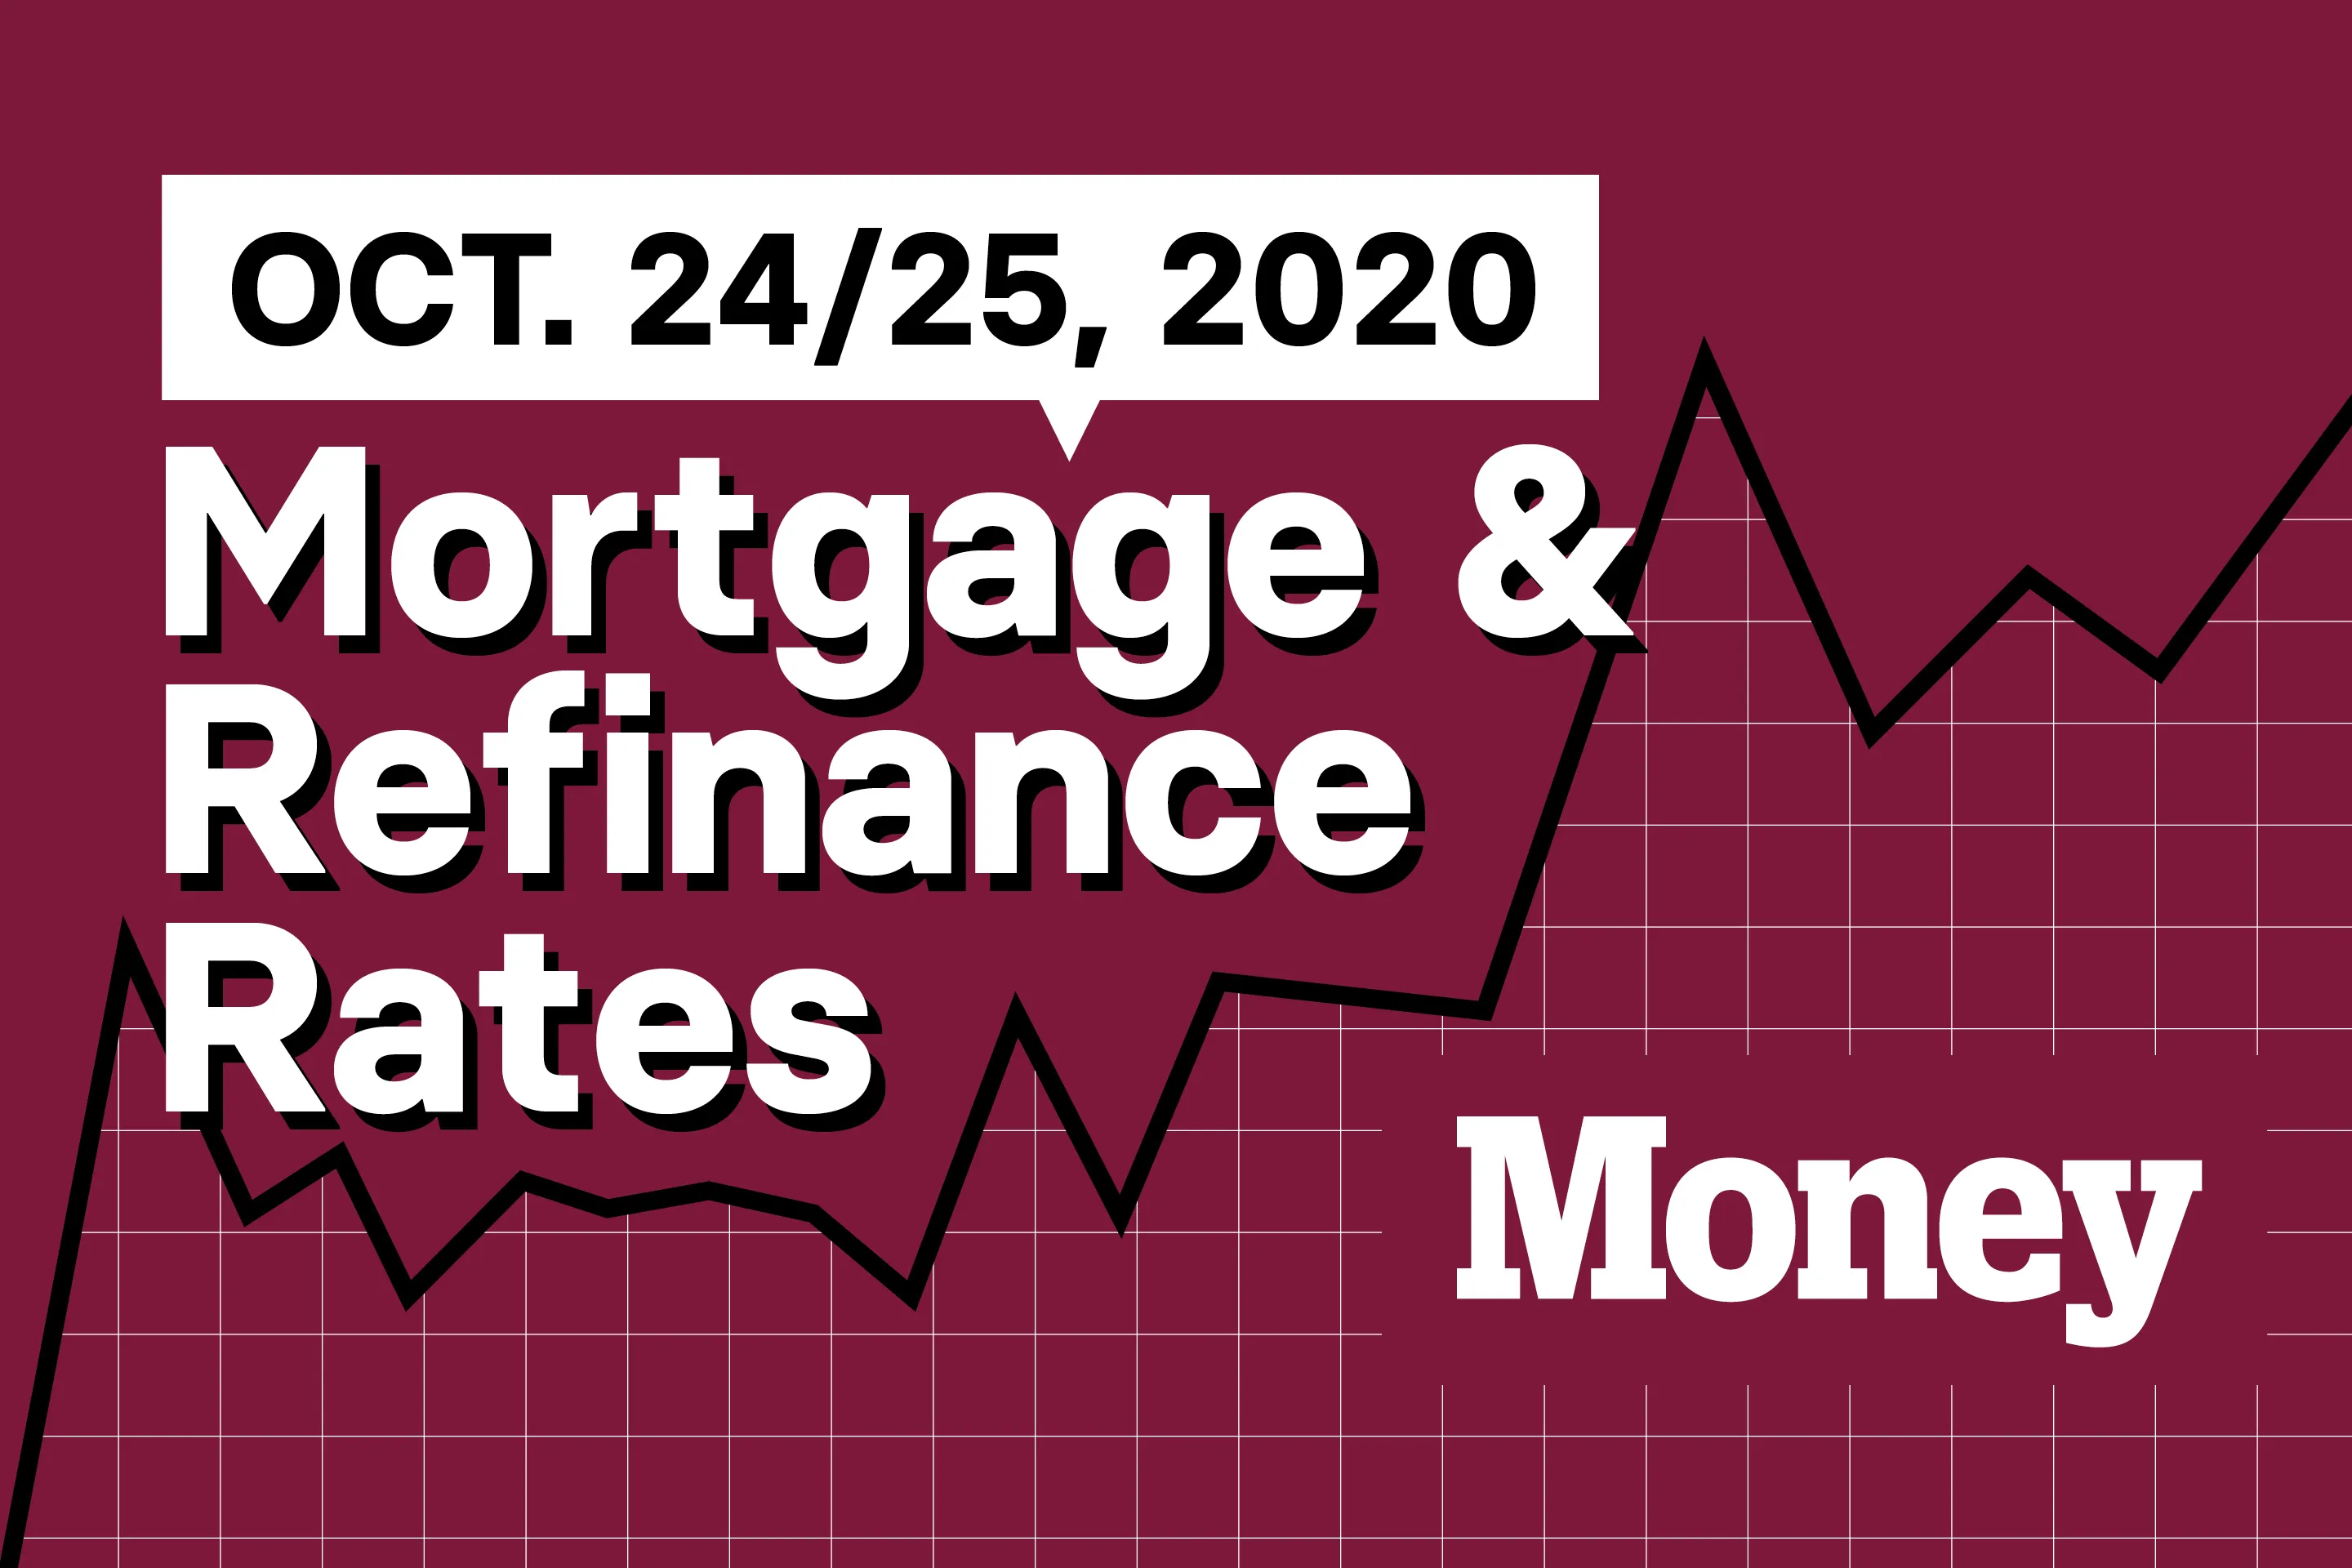 Today's Mortgage and Refinance Rates for October 24 and 25